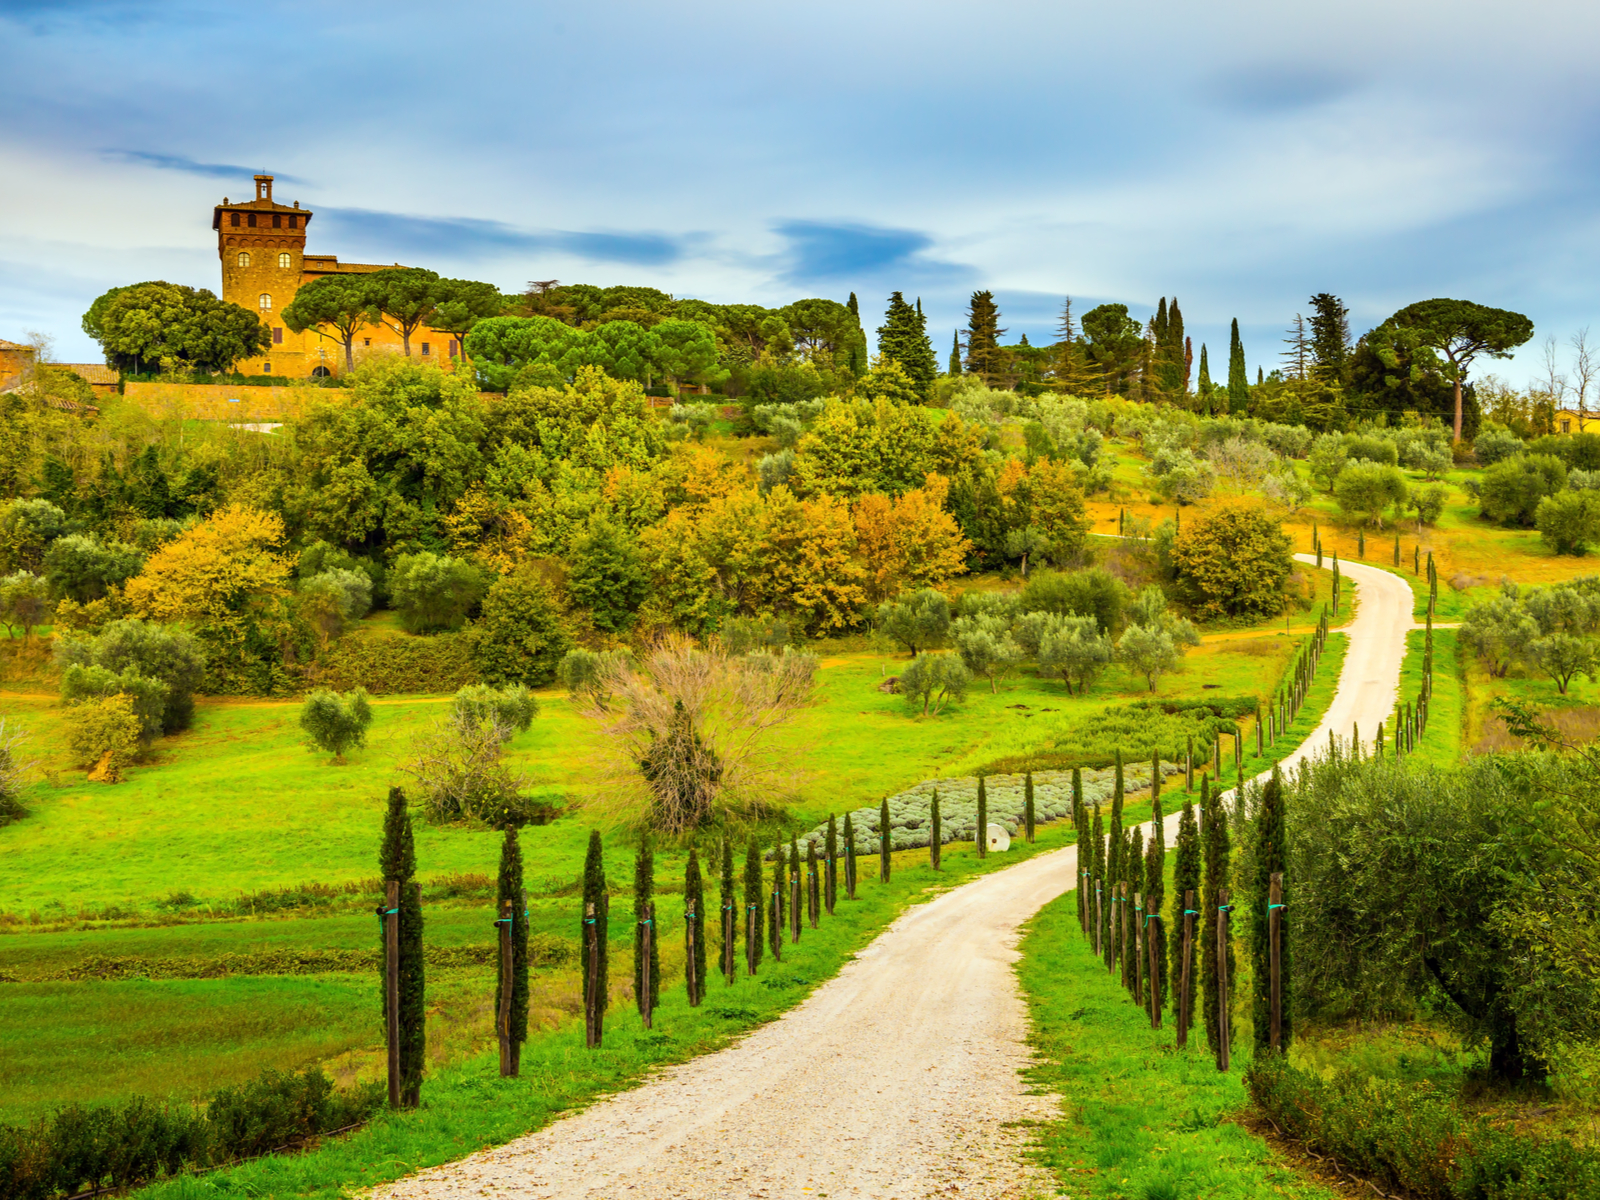 Winding dirt road in Tuscany in the Summer with lots of greenery for a piece on the best places to visit in Italy